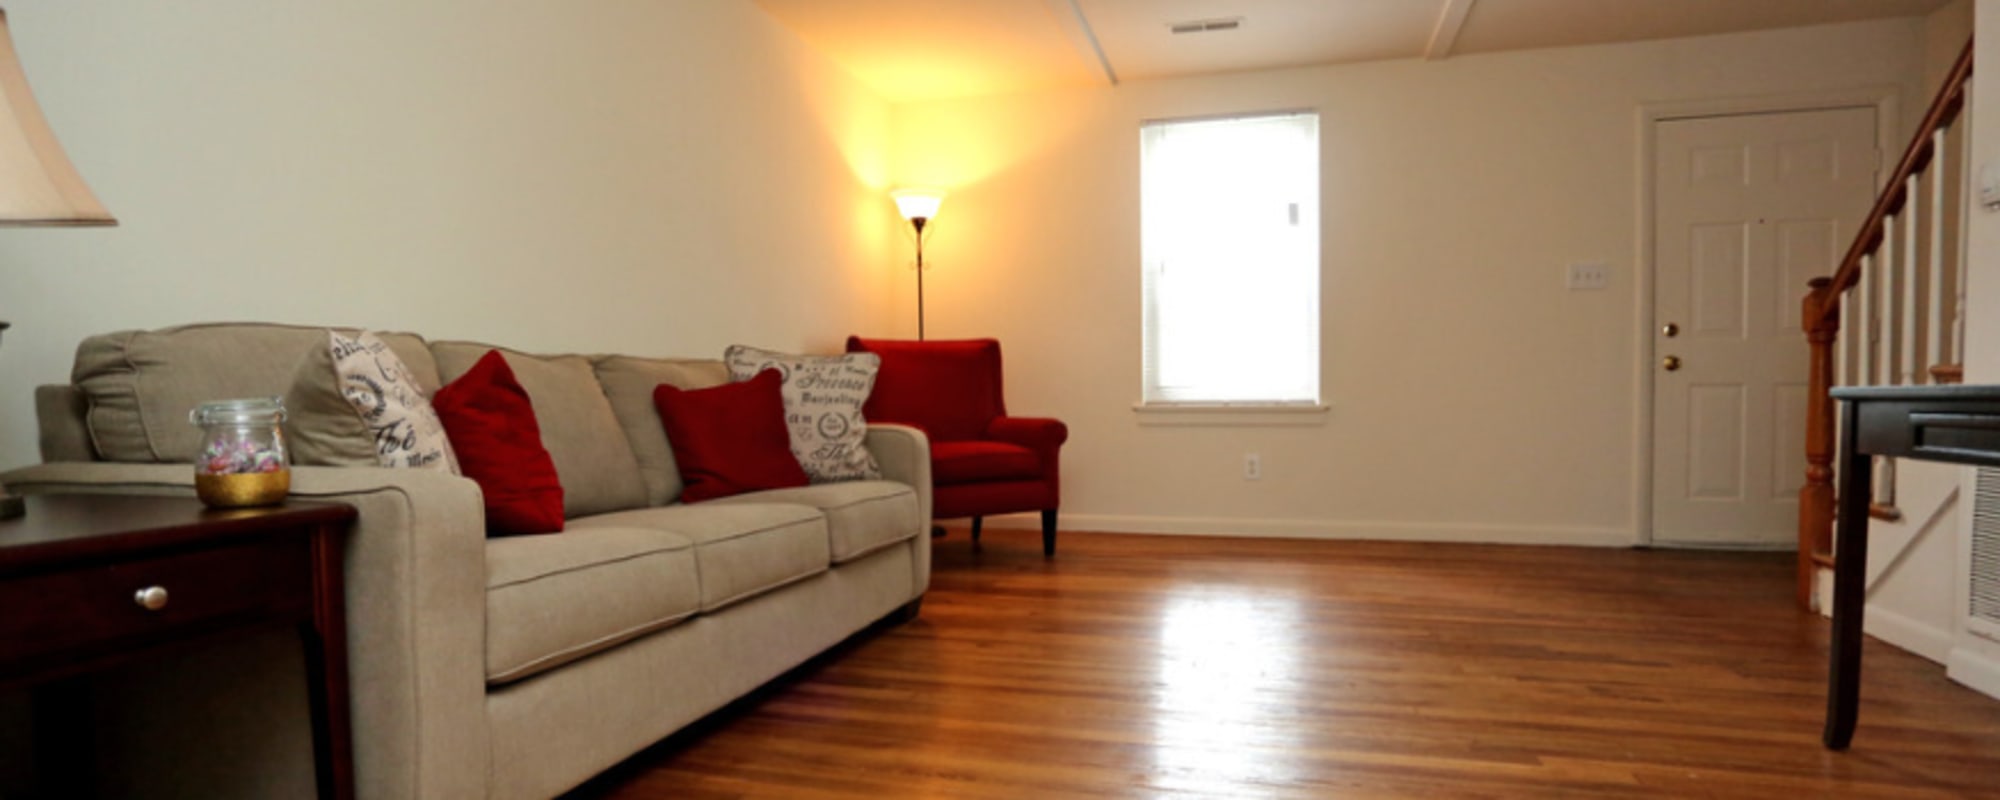 Living room area at Morningside Apartments in Richmond, Virginia